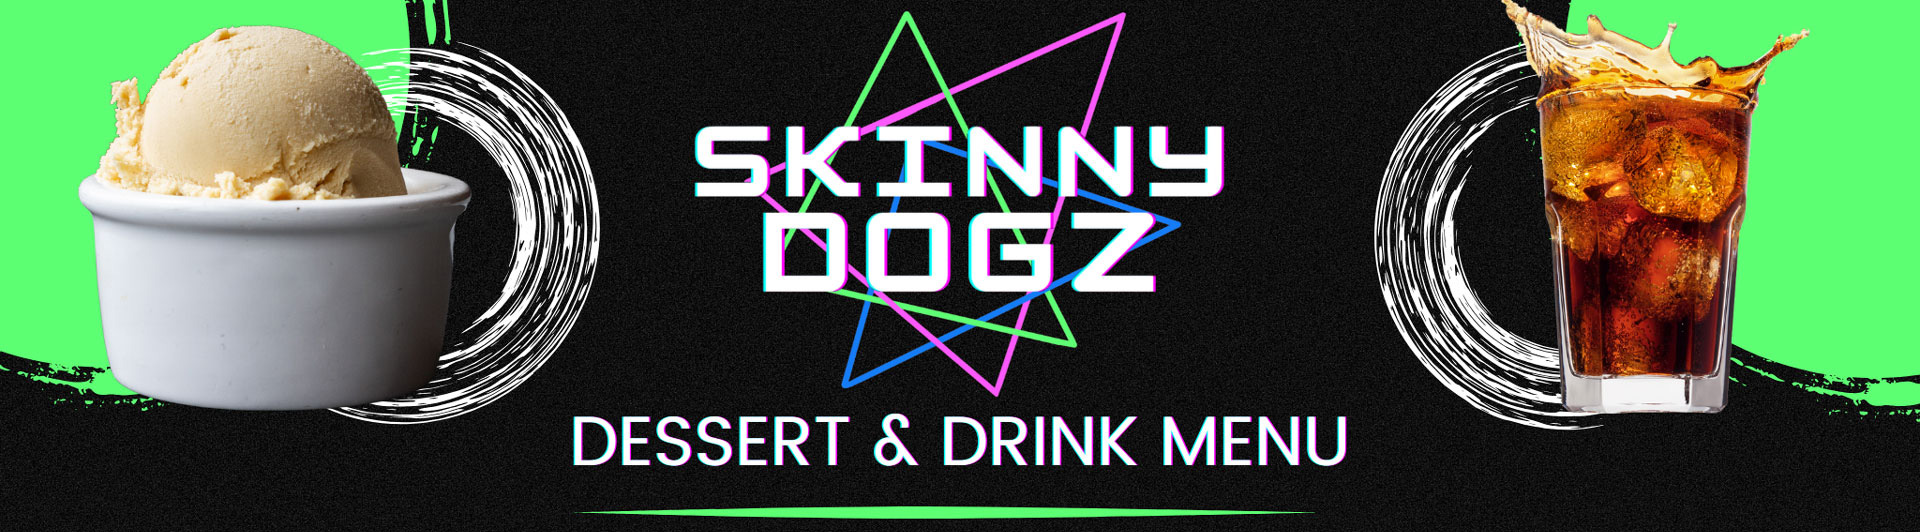 Skinny Dogz dessert and drink menu with various options.